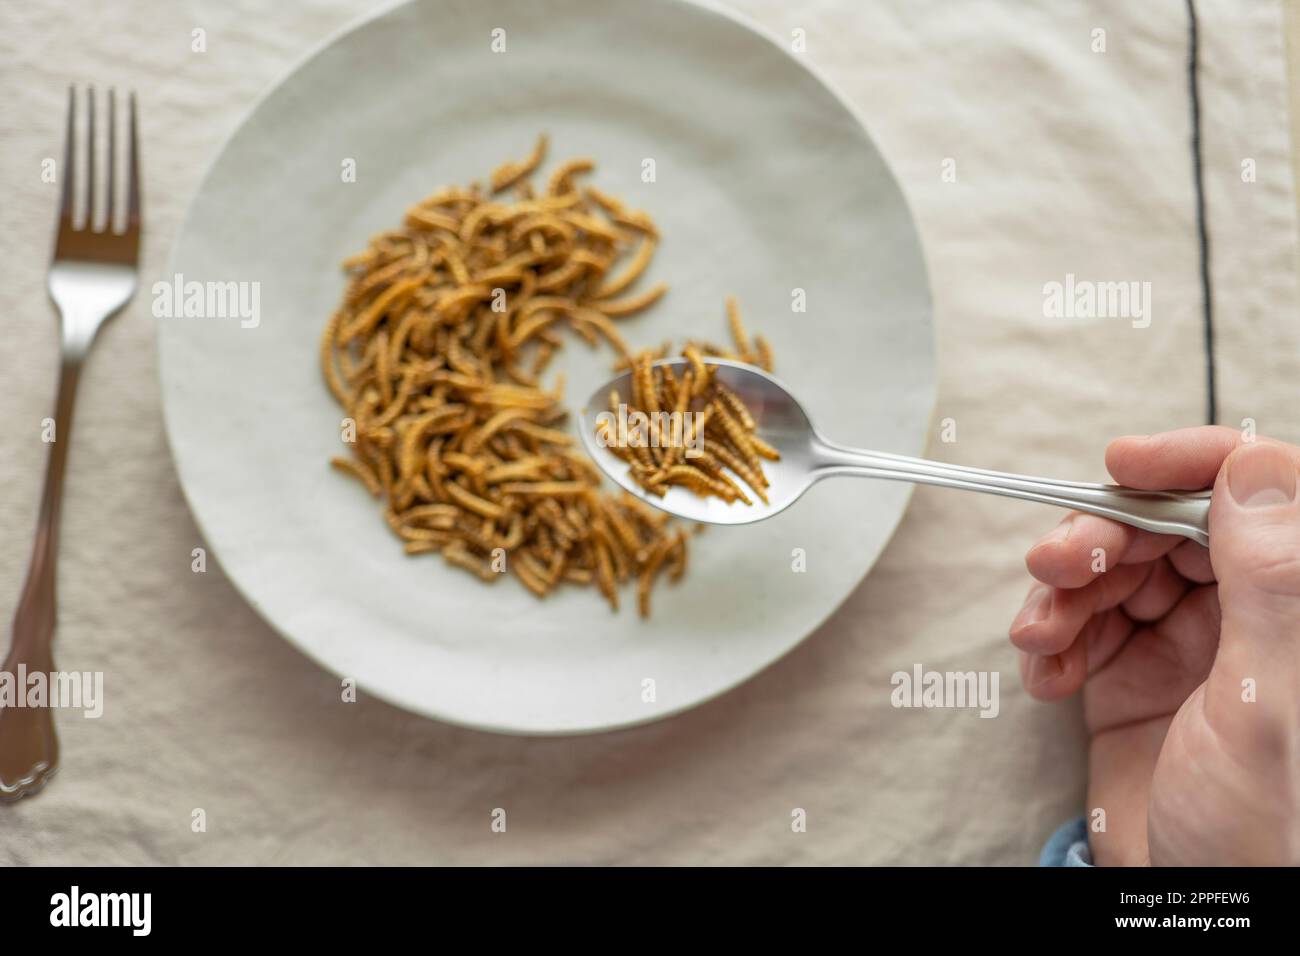 Insect food. Food of the future.Meat Alternative Nutrition Stock Photo -  Alamy